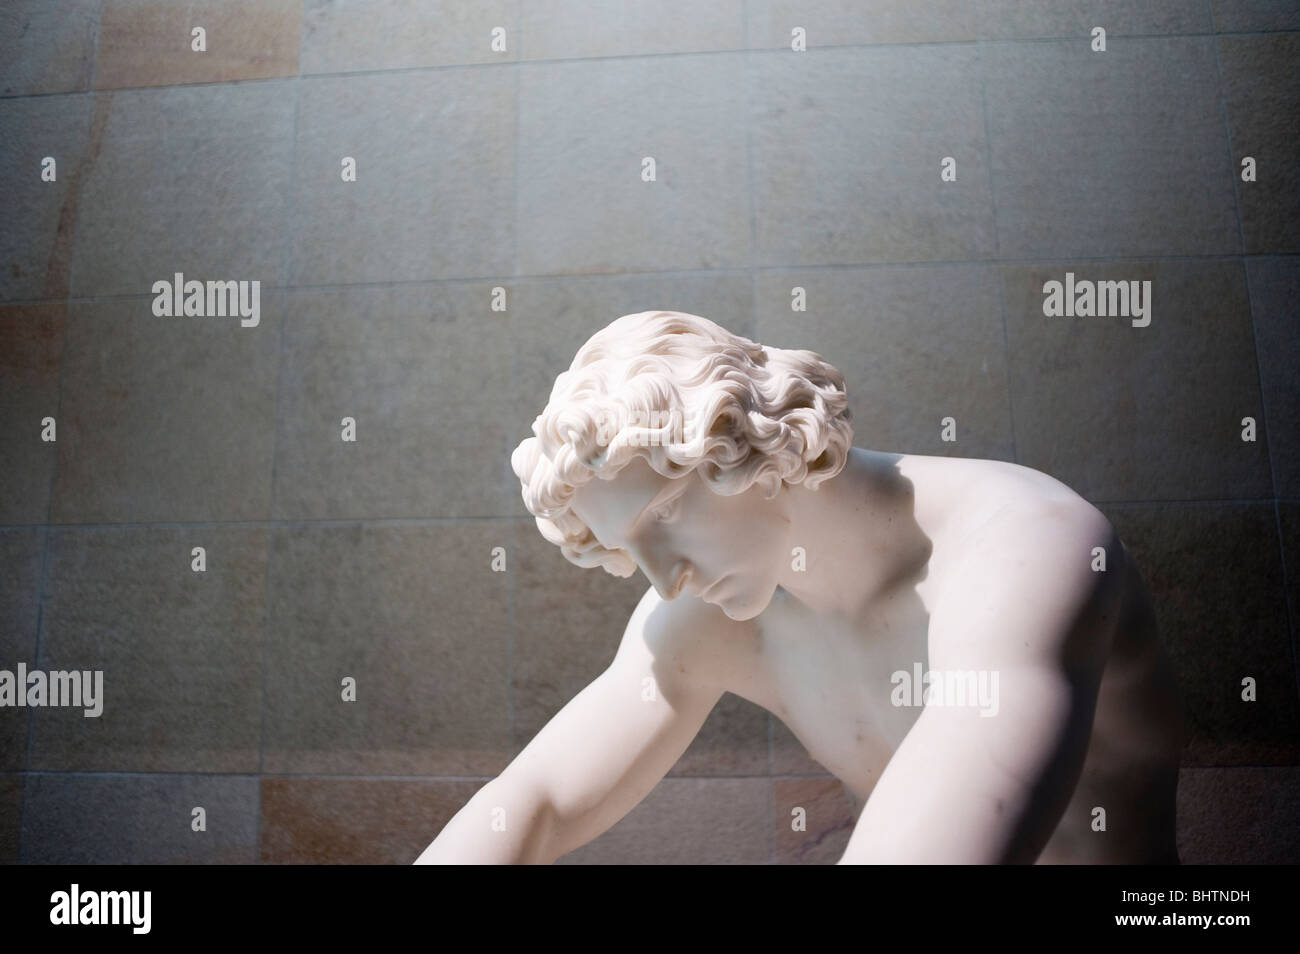 Paris, France - Neo Classical French Sculpture on Display Inside of Orsay Museum, fine art Stock Photo